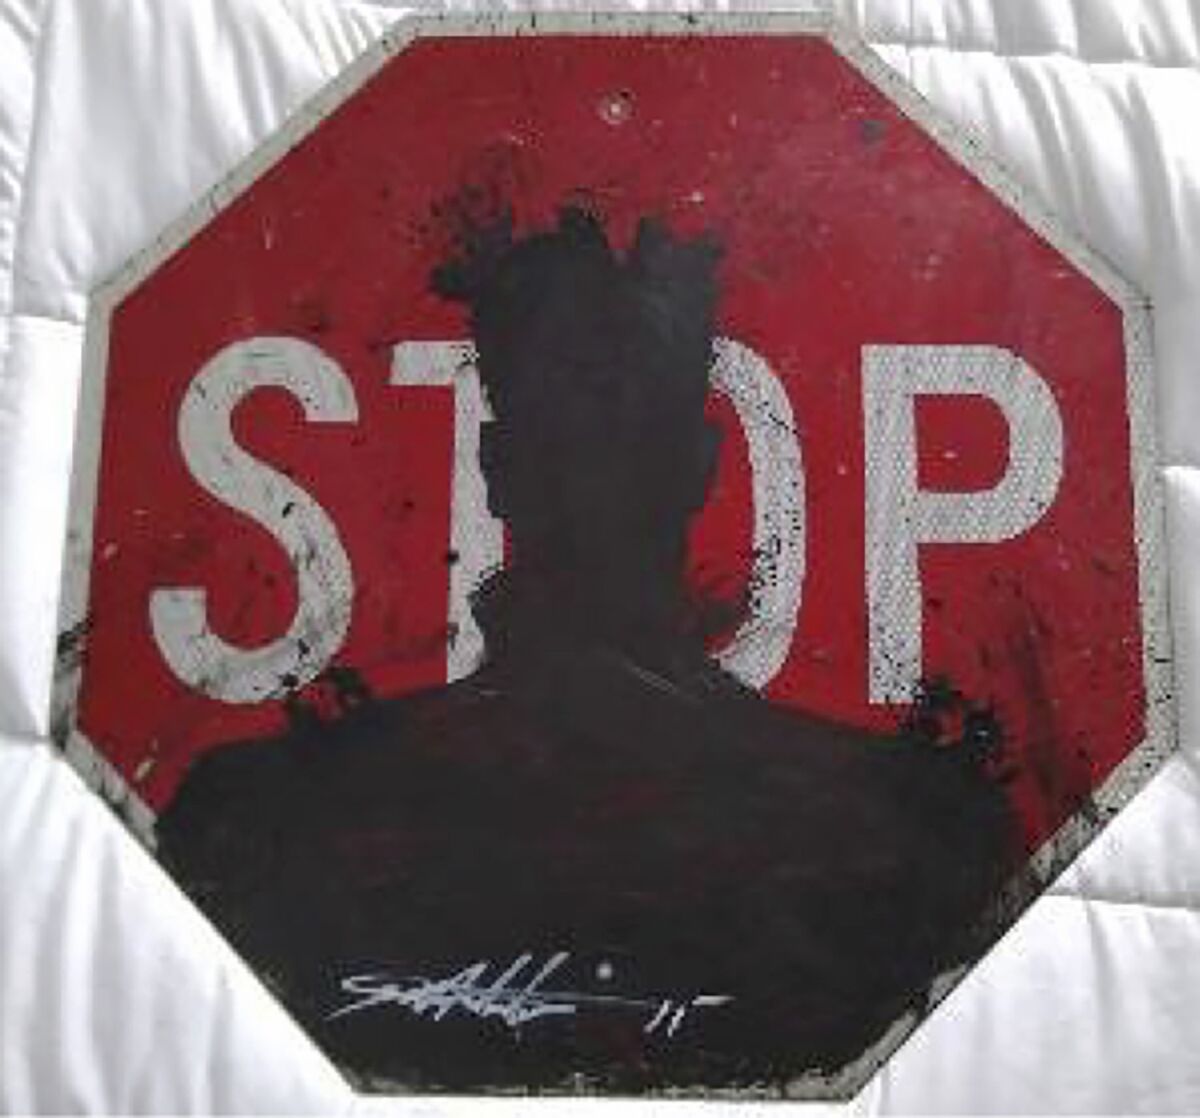 The “Richard Hambleton Shadow Head STOP sign 2011" painting, purchased for $20,000, was later deemed to be fake.